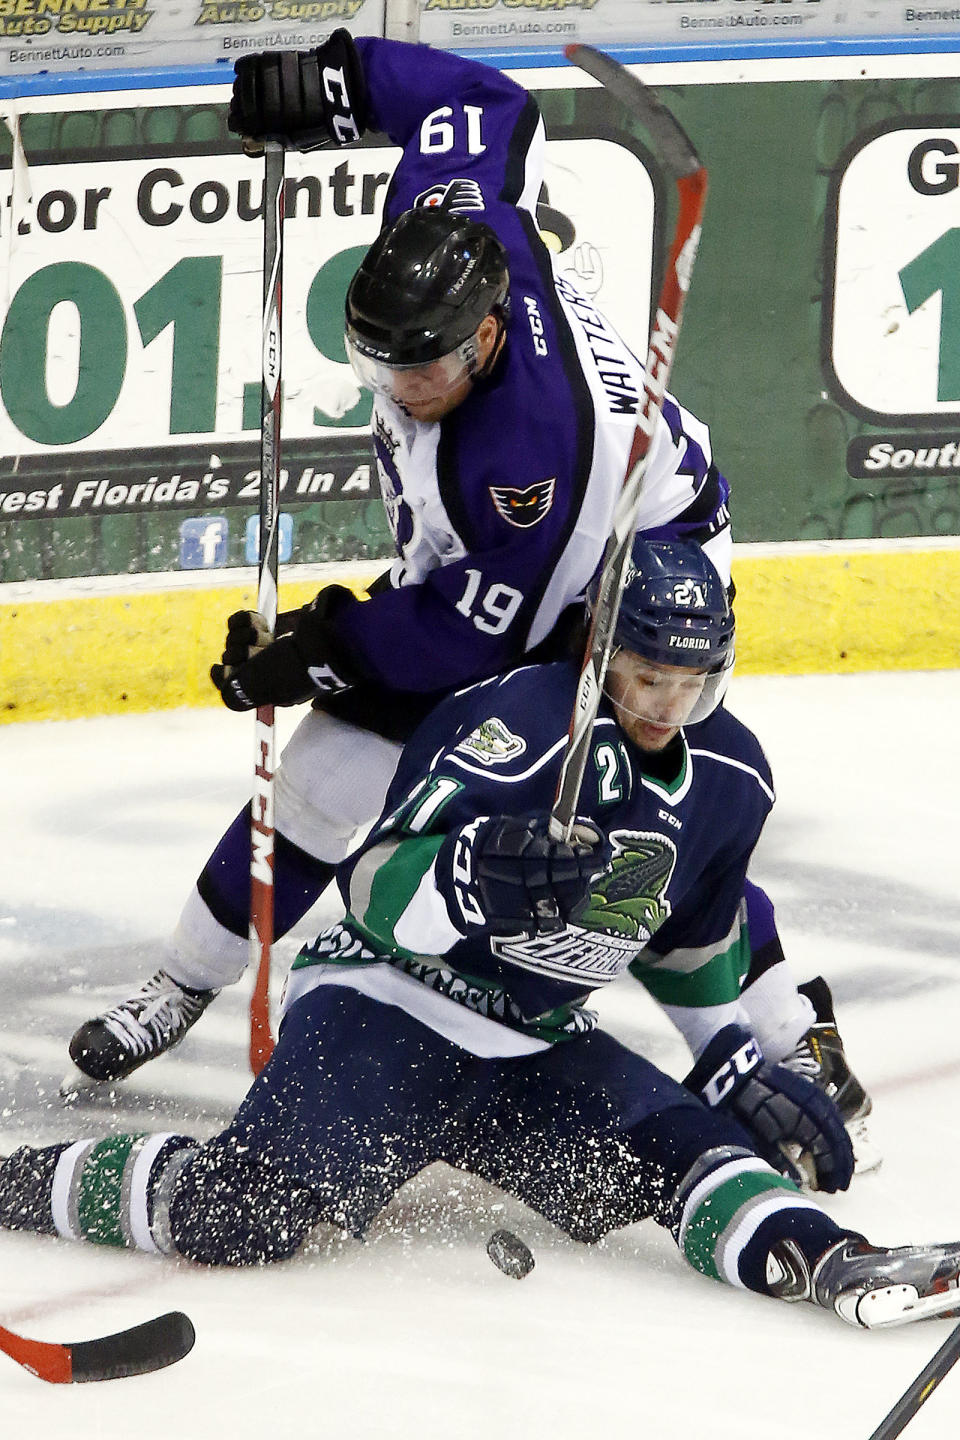 FILE - In this April 1, 2015, file photo, Florida Everblades' Spencer Pommells, bottom, is pressured by Reading Royals' Ian Watters (19) duirng the third period of an ECHL hockey game in Estero, Fla. The ECHL season was canceled because of the coronavirus pandemic. (AP Photo/Naples Daily News, Core Perrine)